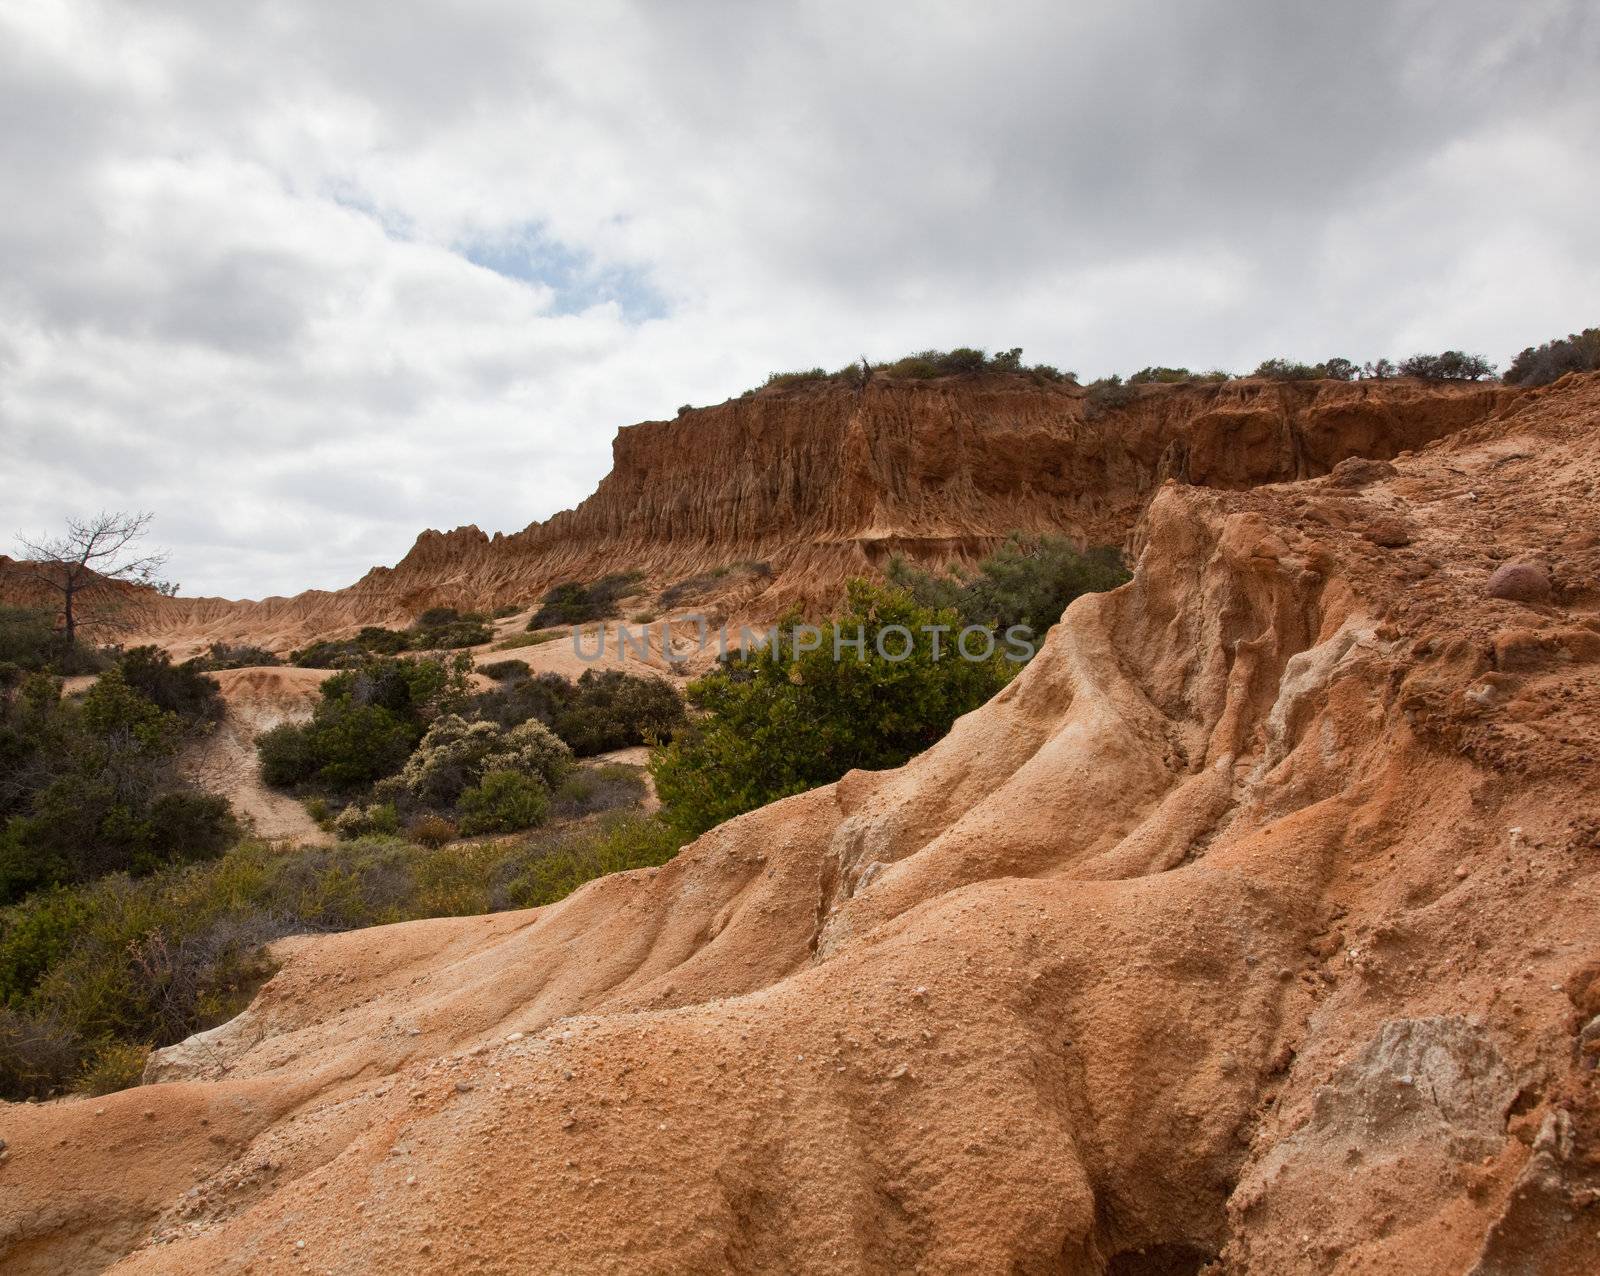 Rugged razor edged erosion in the sandstone on Torrey Pines hillside with sandstone bluff in the foreground